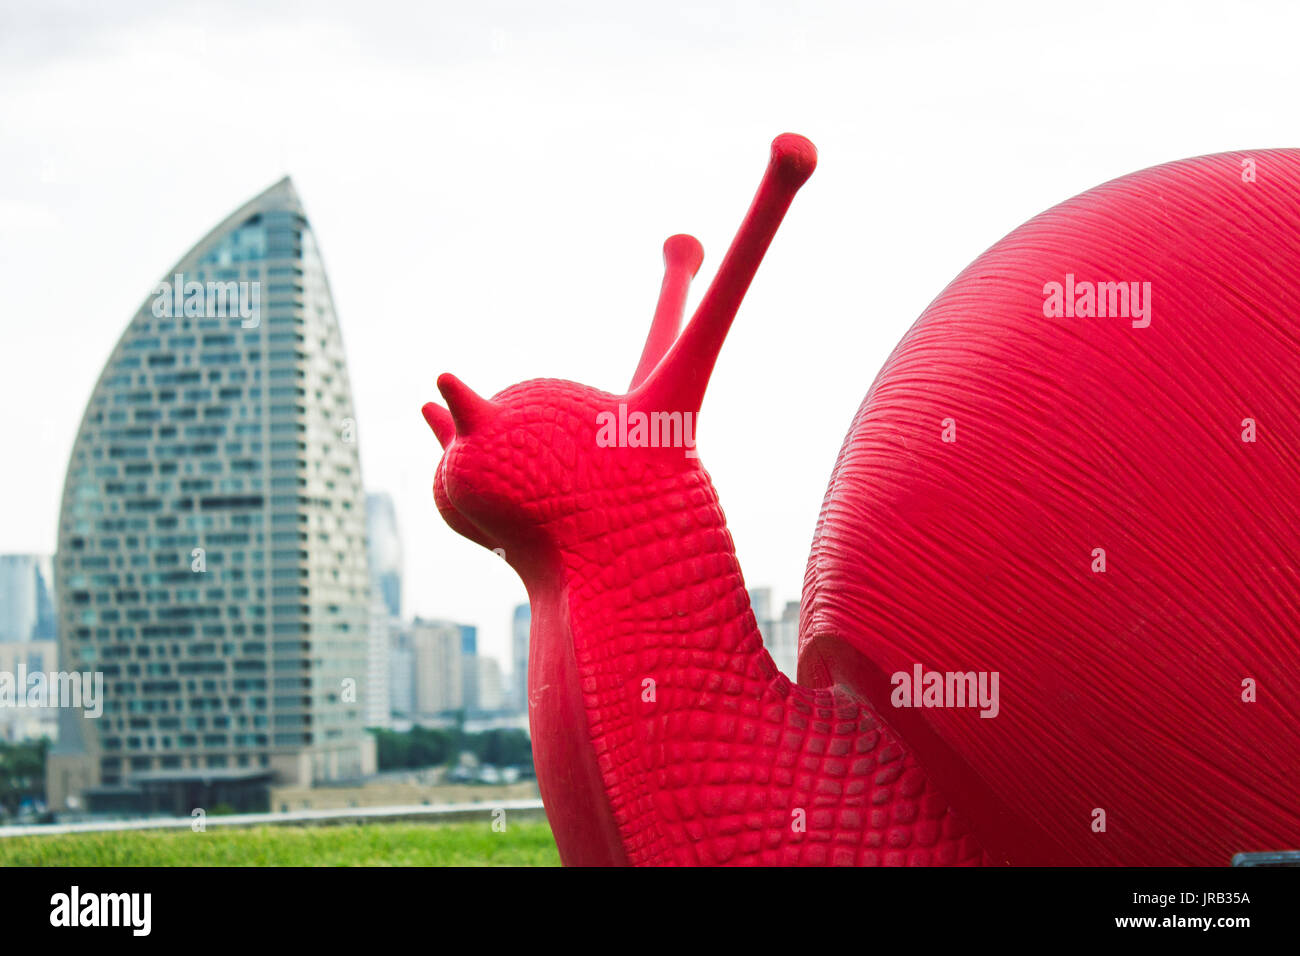 huge red snail Stock Photo